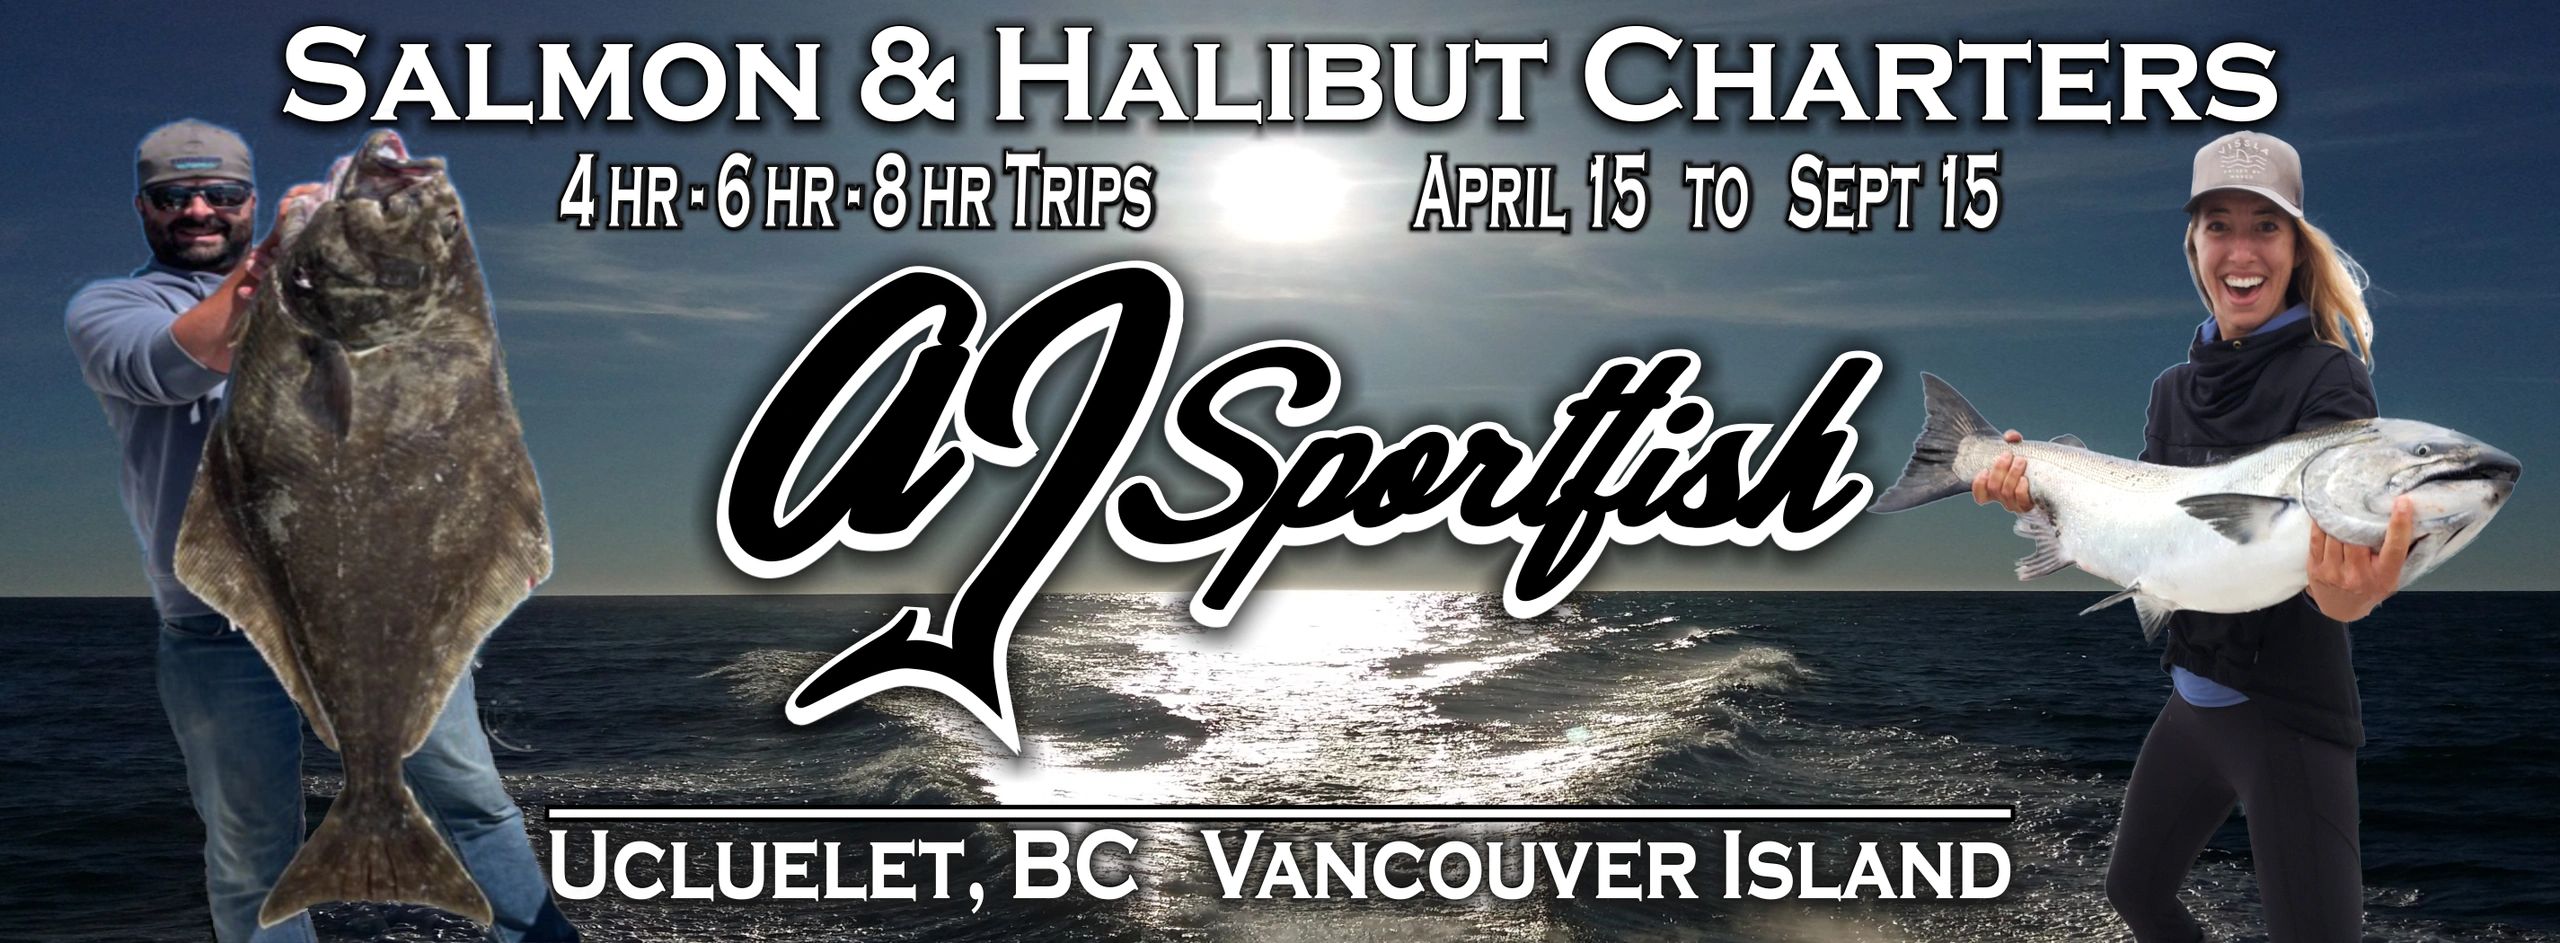 1 of the Best Salmon and Halibut Fishing Charters on Vancouver Island.